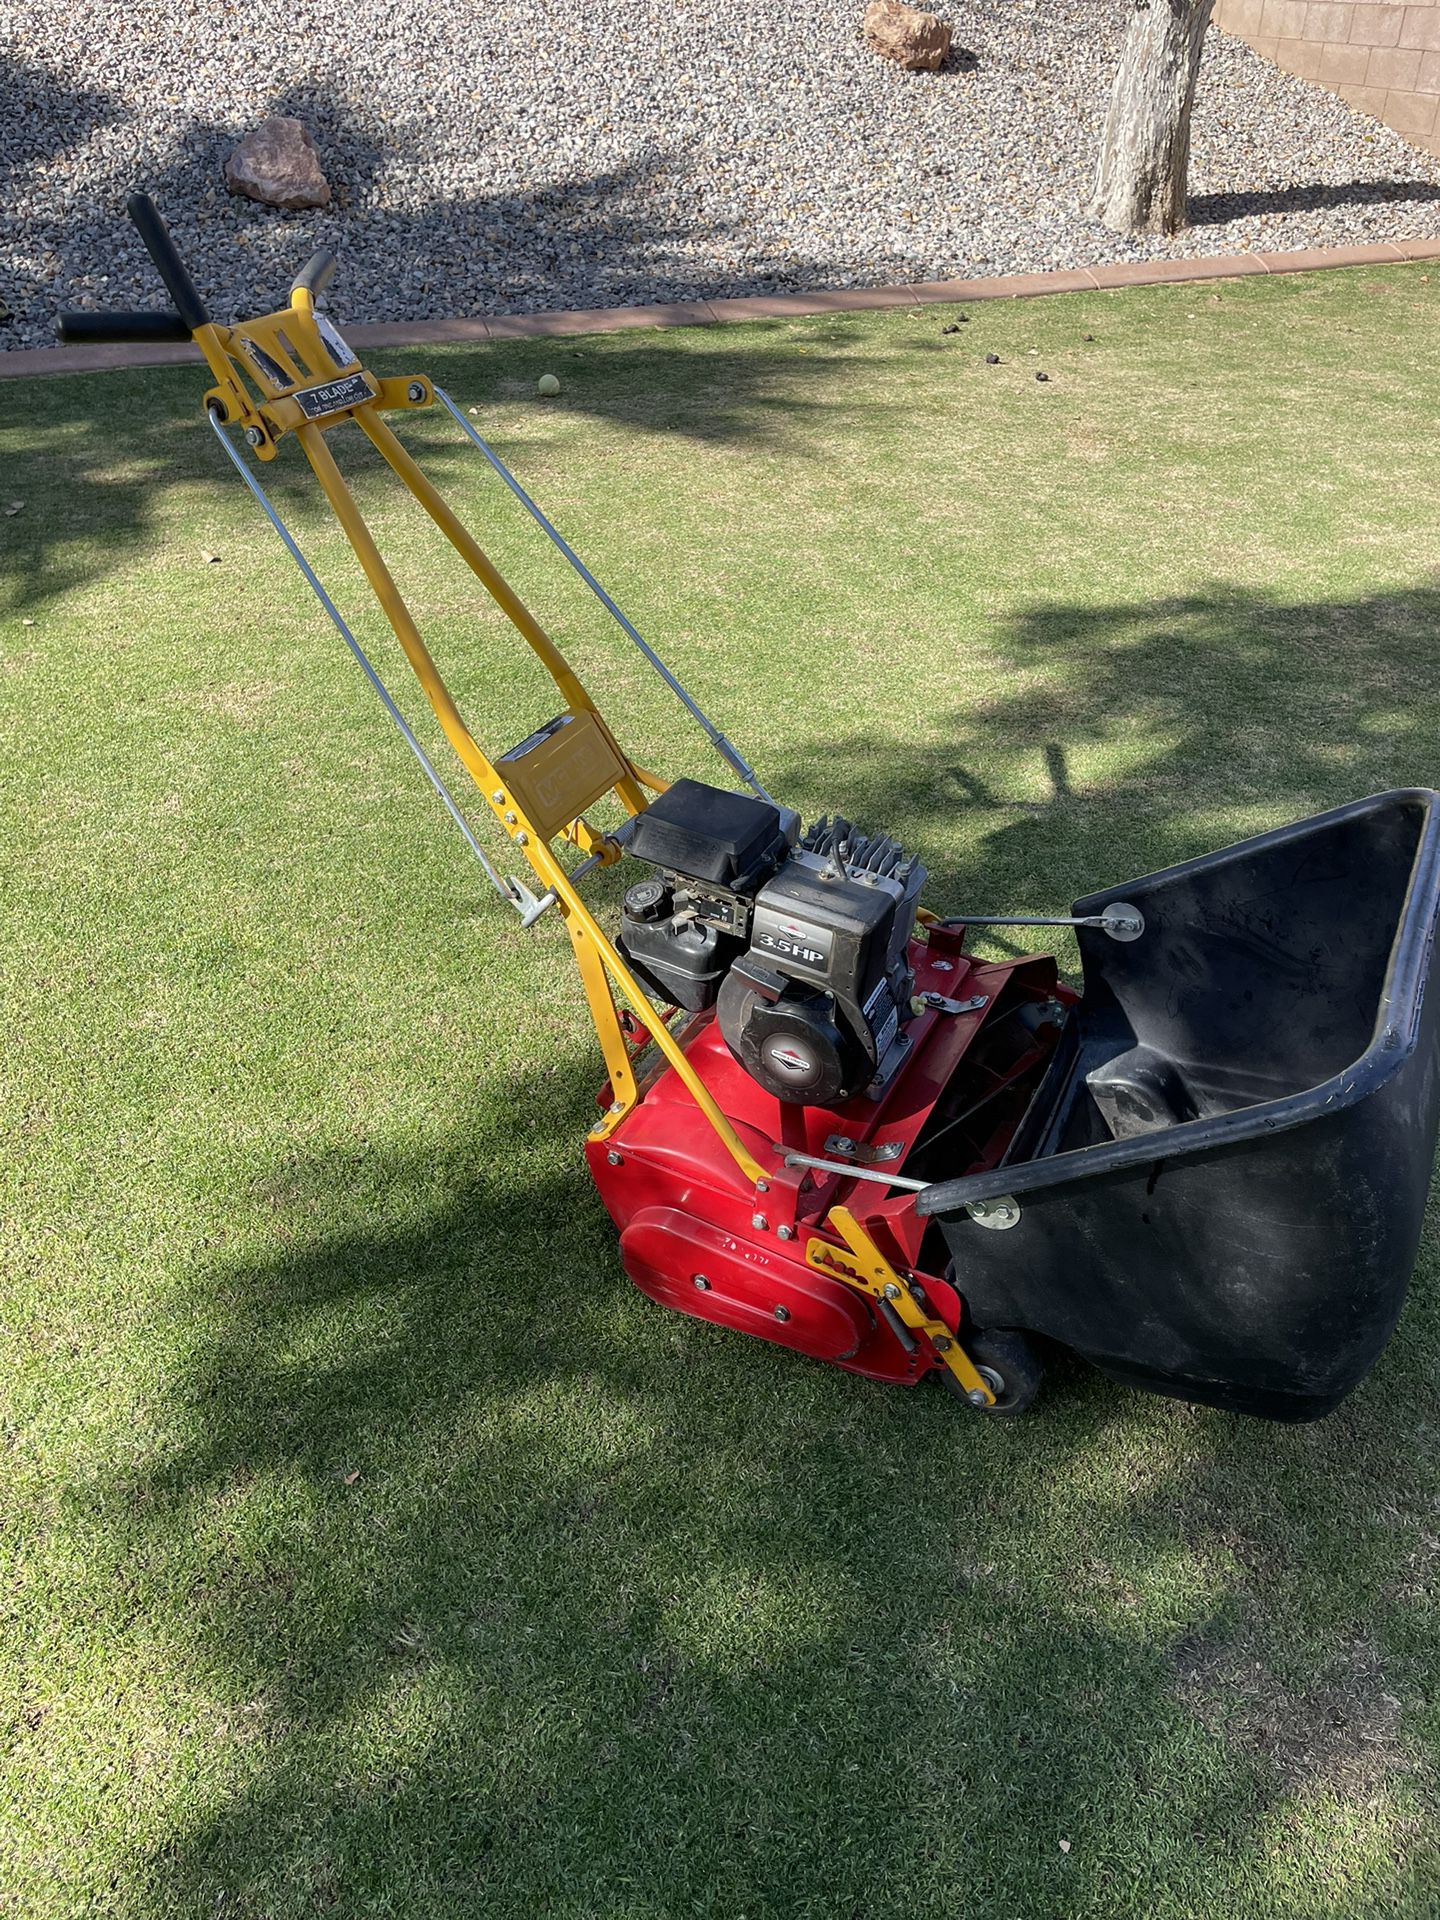 McLane 20-inch Reel Mower Grass Catcher for Sale in Temple City, CA -  OfferUp